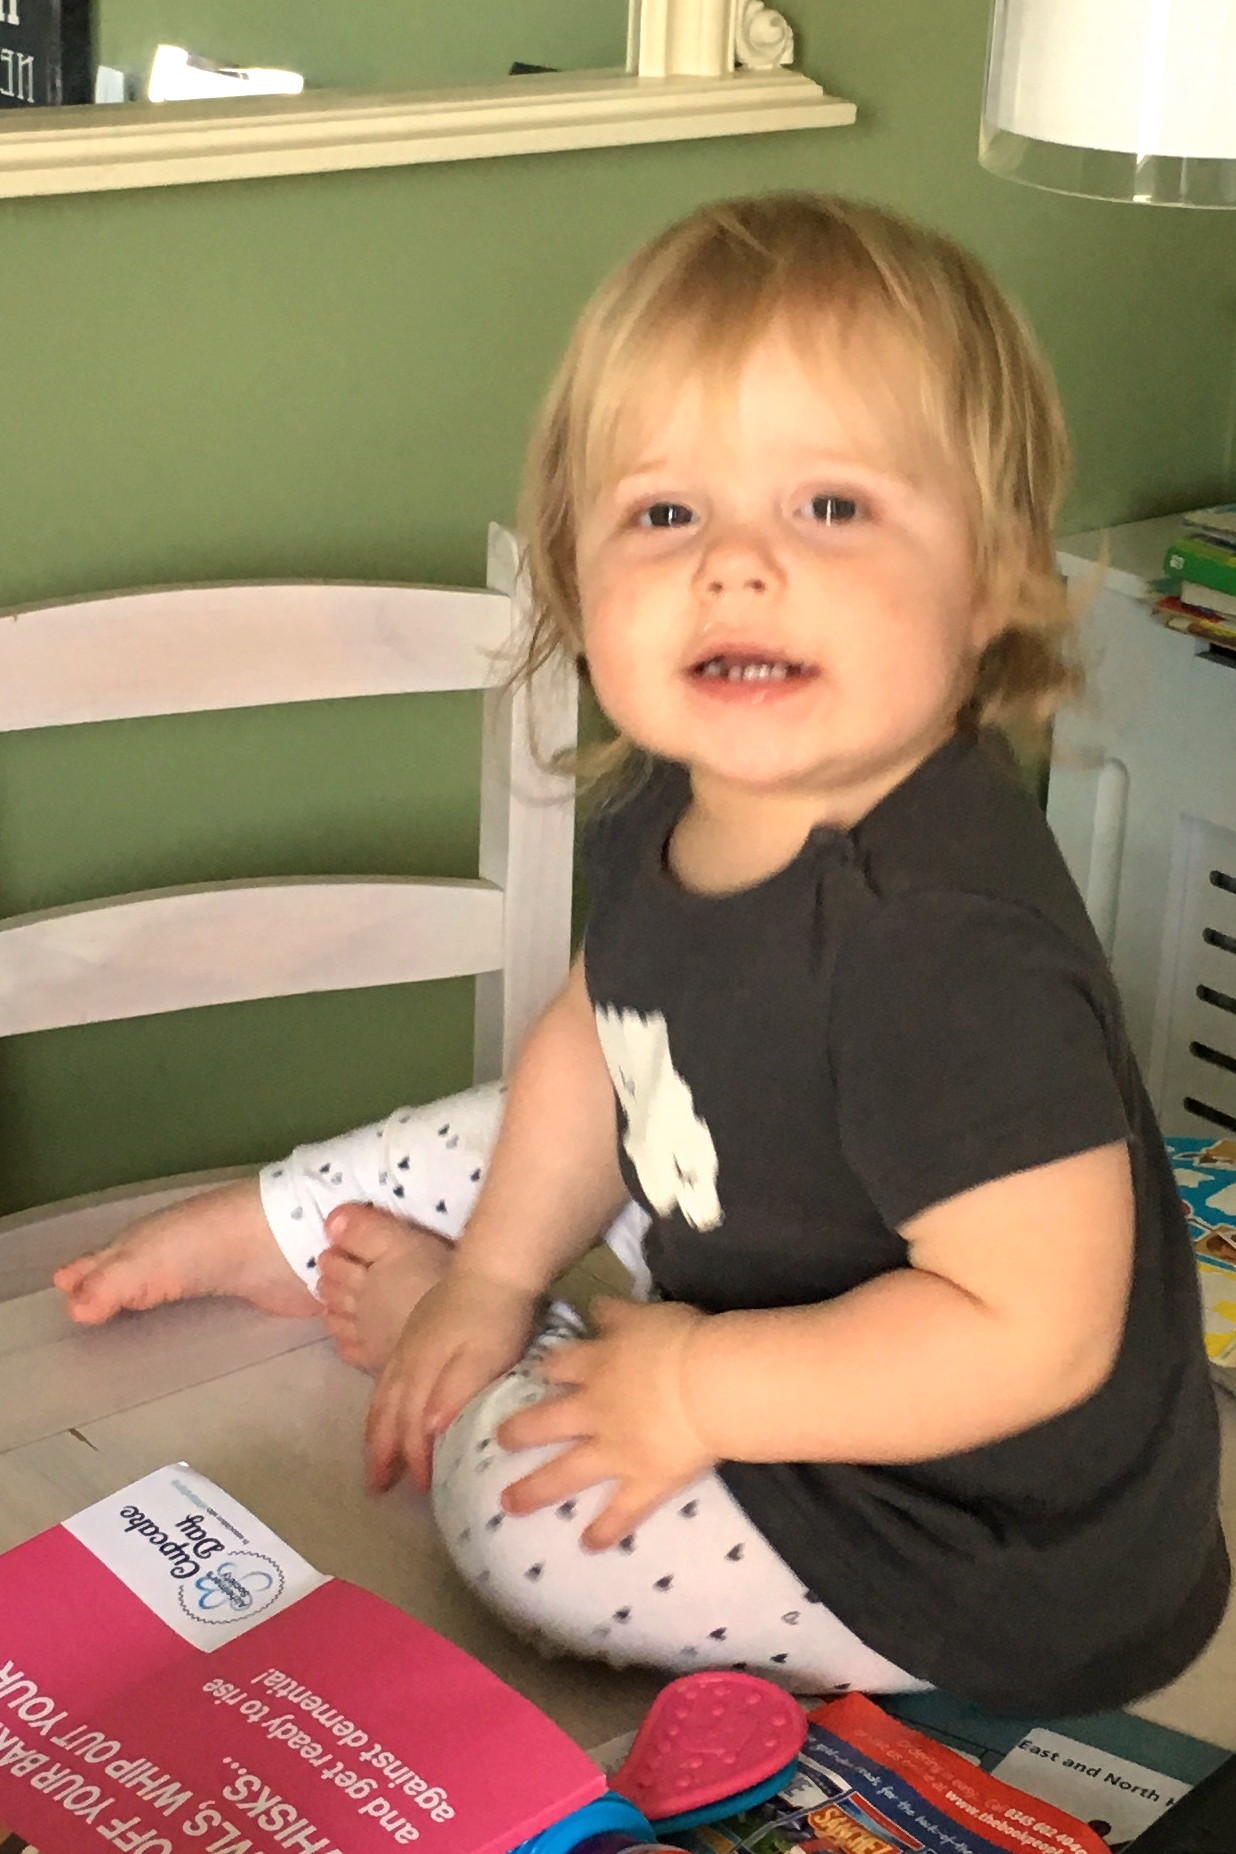 14 months old girl, sitting on dining room table